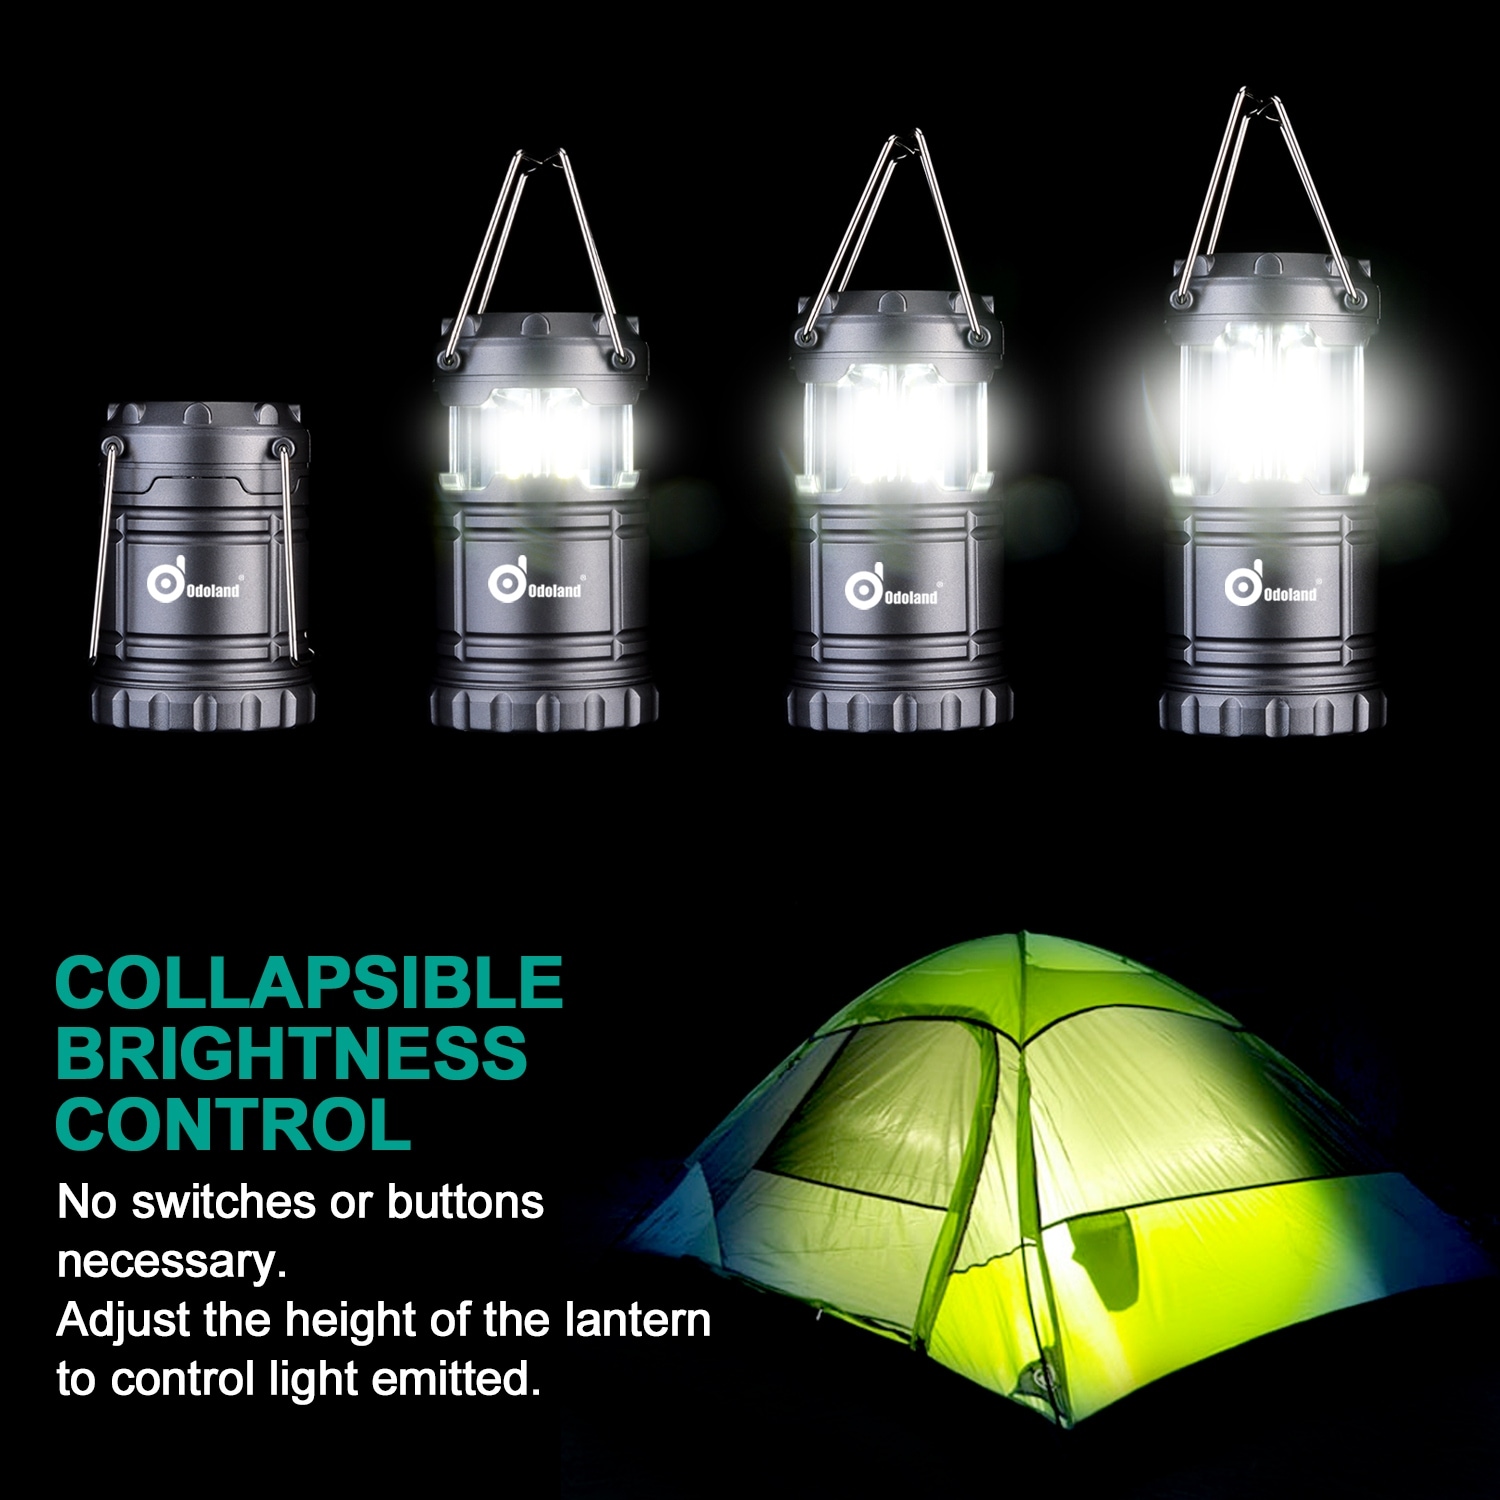 https://ak1.ostkcdn.com/images/products/is/images/direct/4d2f9352aa8c709f82898c7bae112889dd9d7b7e/ODOLAND-Ultra-Bright-Collapsible-Camping-LED-Lantern-with-Portable-Lights-for-Outdoor-Recreations%2C-Emergency.jpg